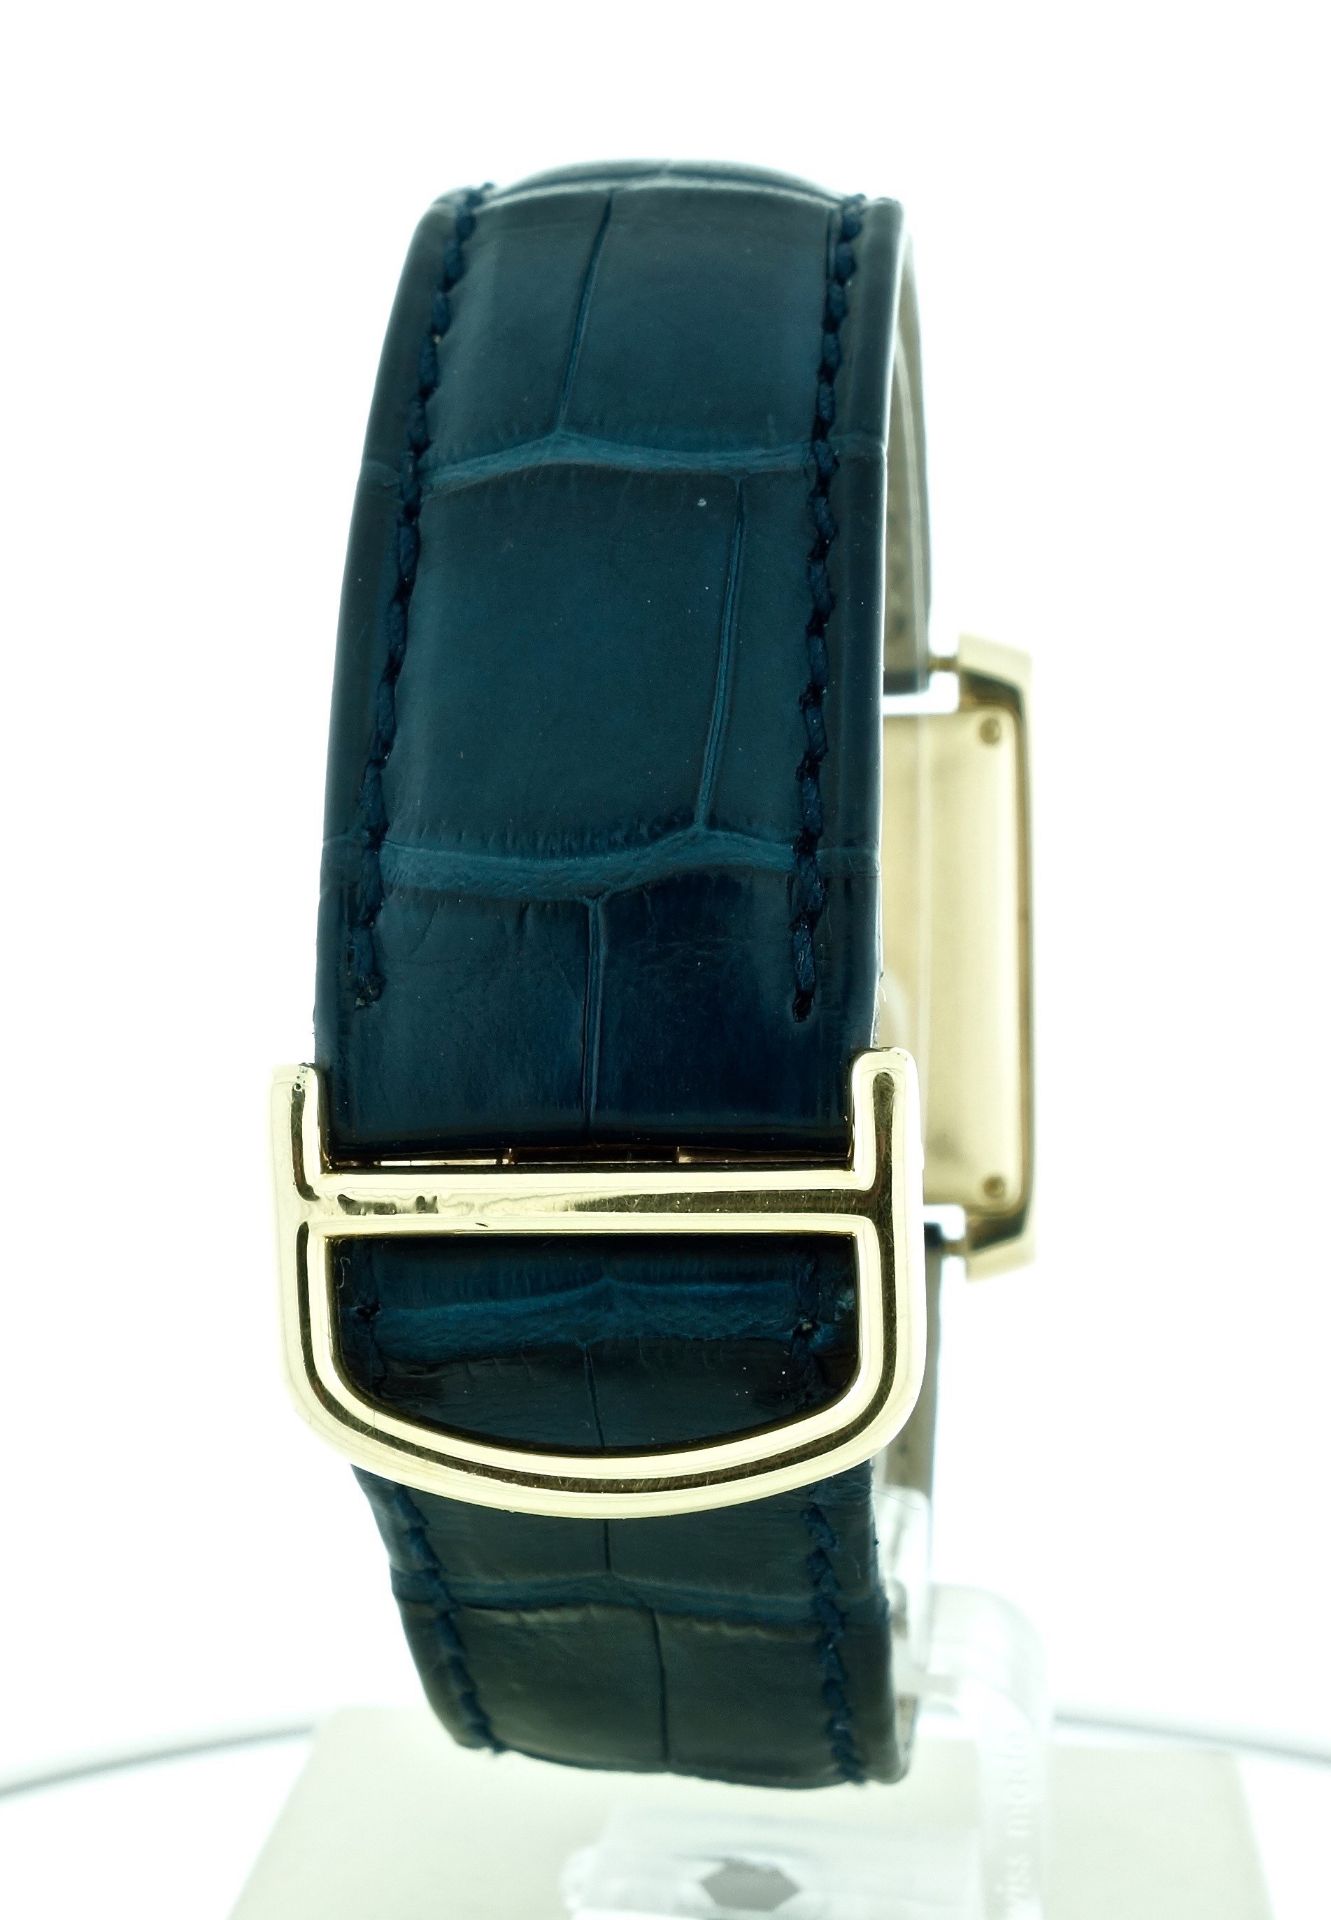 2002 Gents Cartier Tank Francaise - 1840 - Image 4 of 4